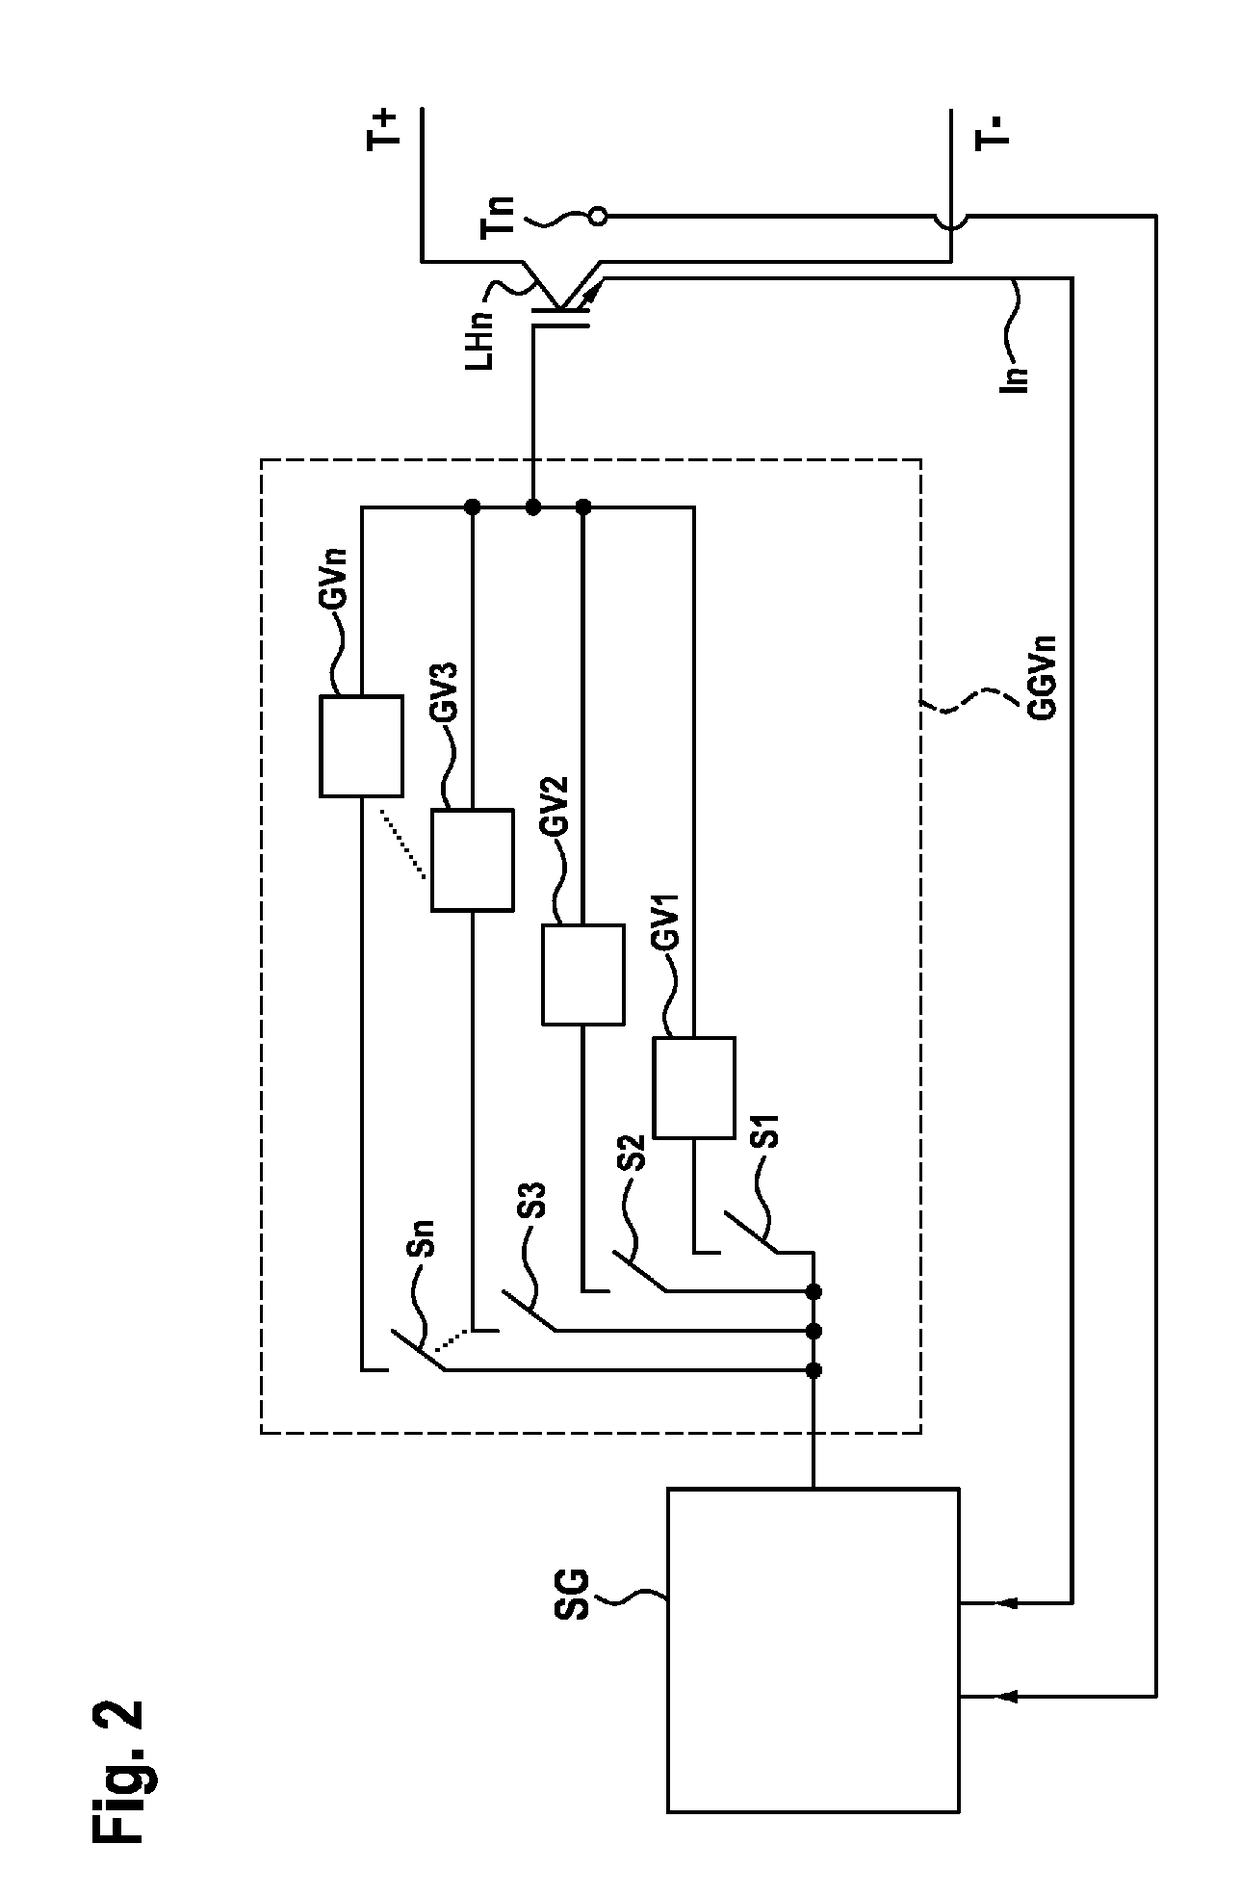 Method and device for operating power semiconductor switches connected in parallel